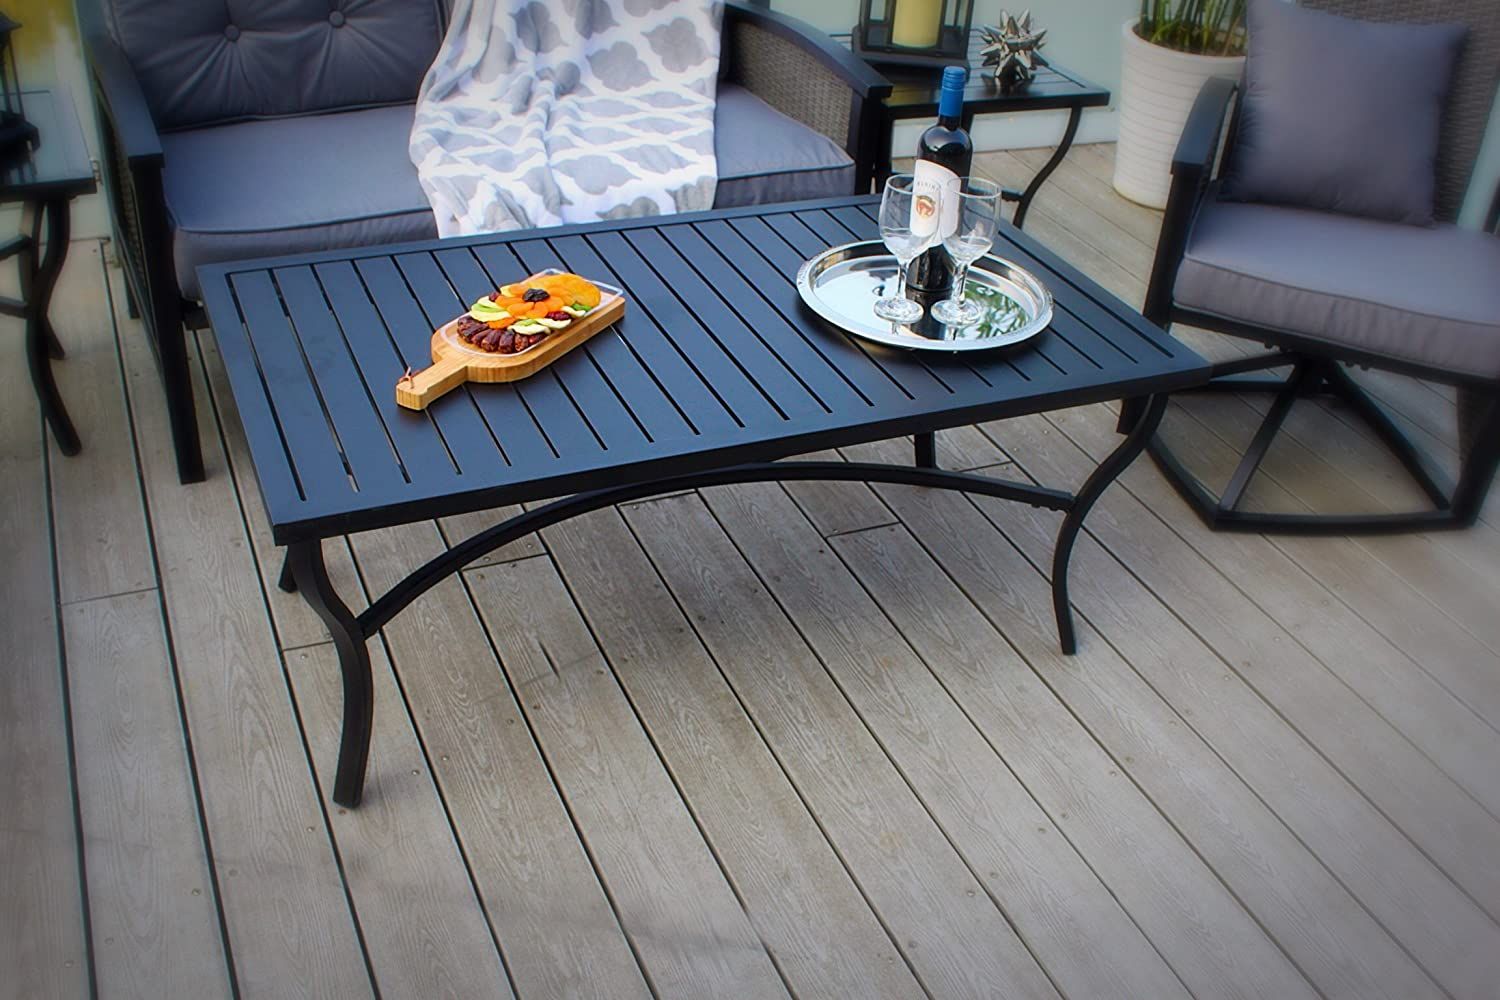 The 8 Best Outdoor Coffee Tables Of 2020 For Your Porch Or Patio | Spy Throughout Outdoor Half Round Coffee Tables (View 12 of 15)